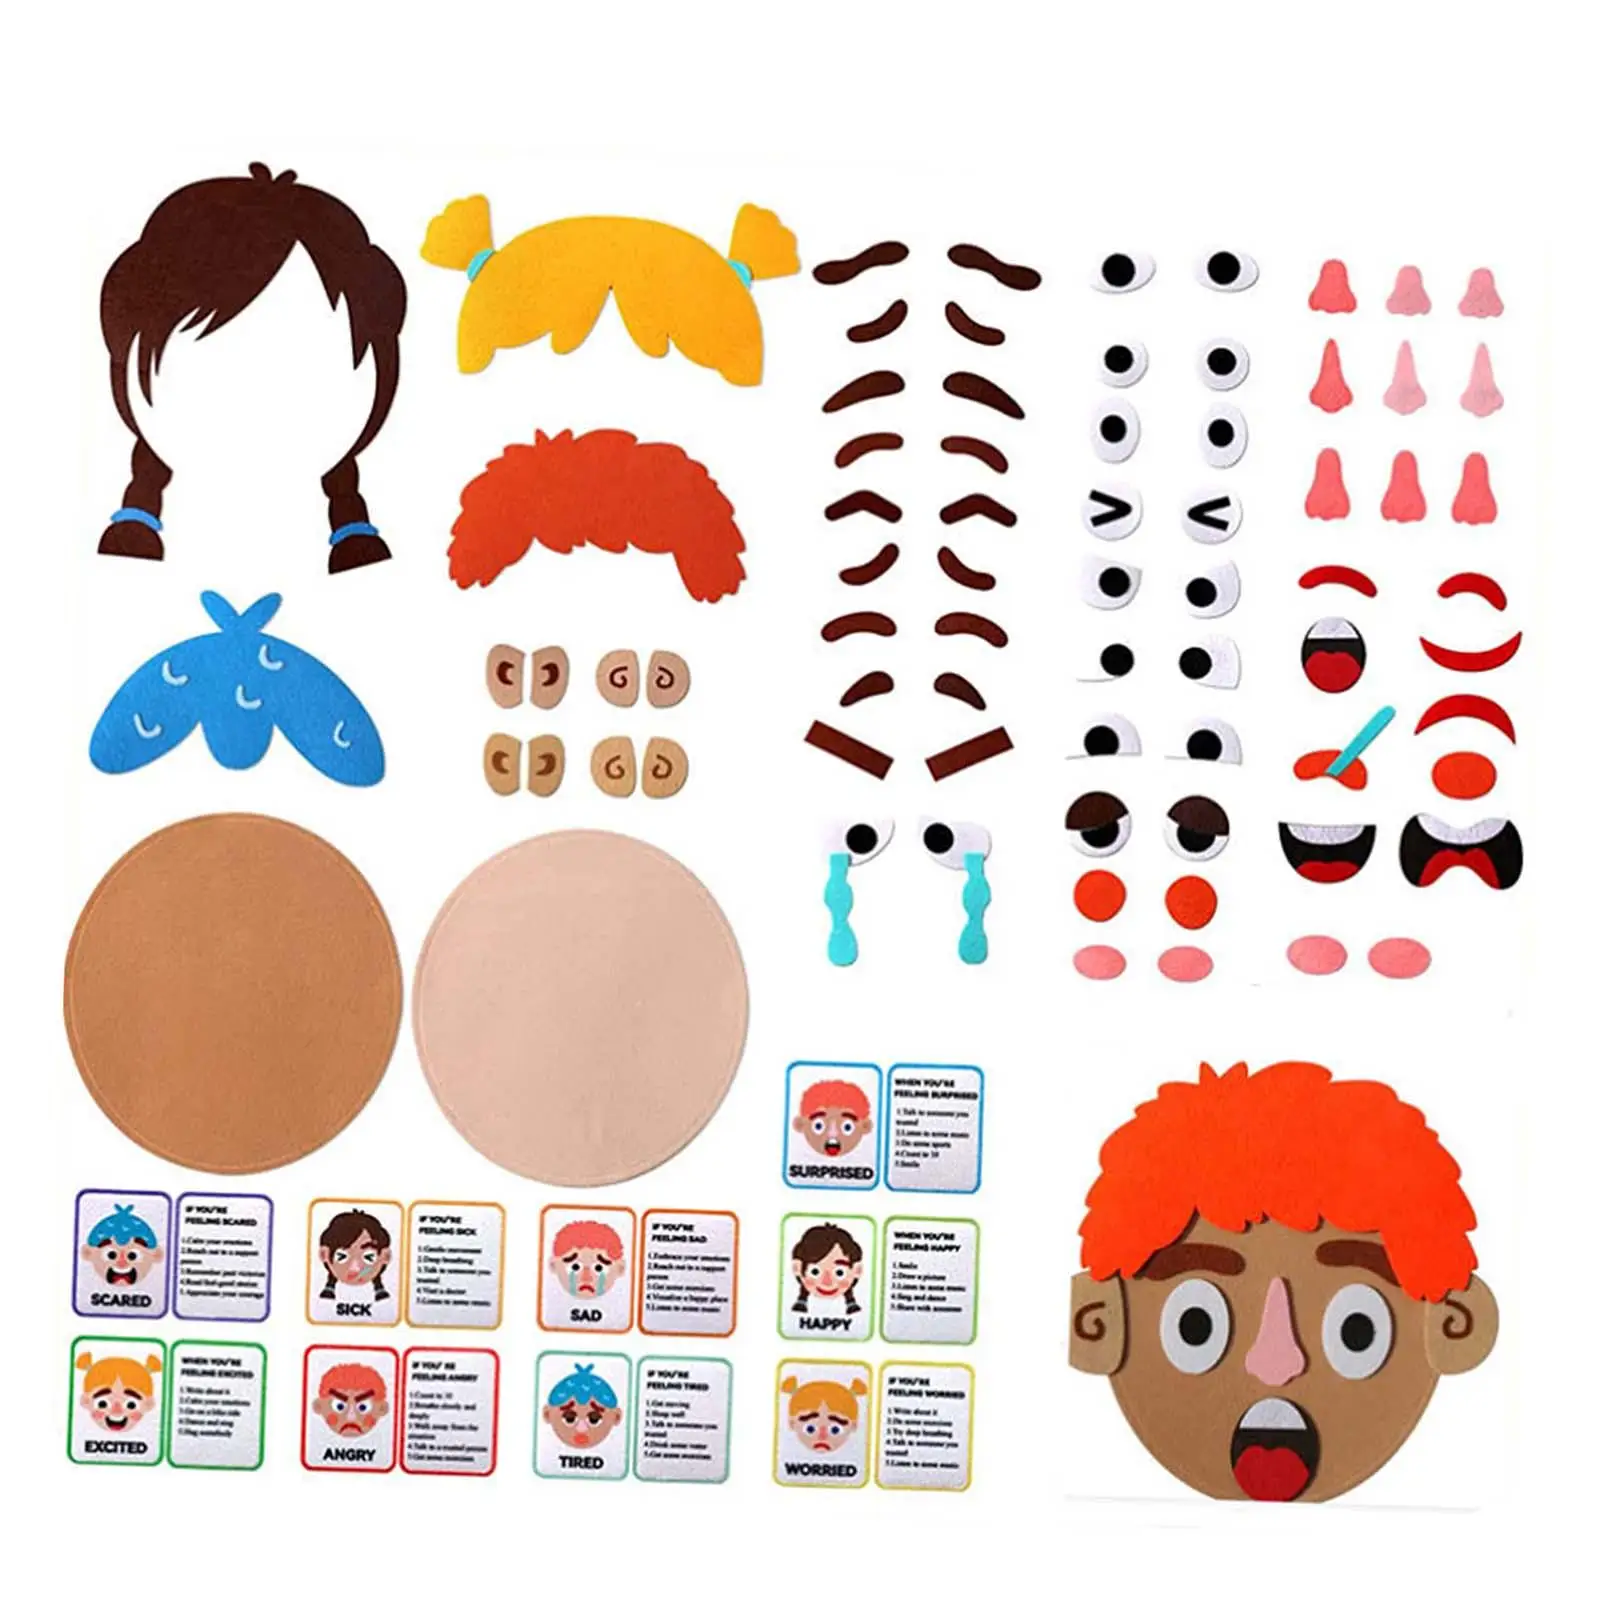 Social Emotional Learning Games for Kids Learning Social Skills Faces Stickers Games for Kids Children Girls Toddlers Ages 3+